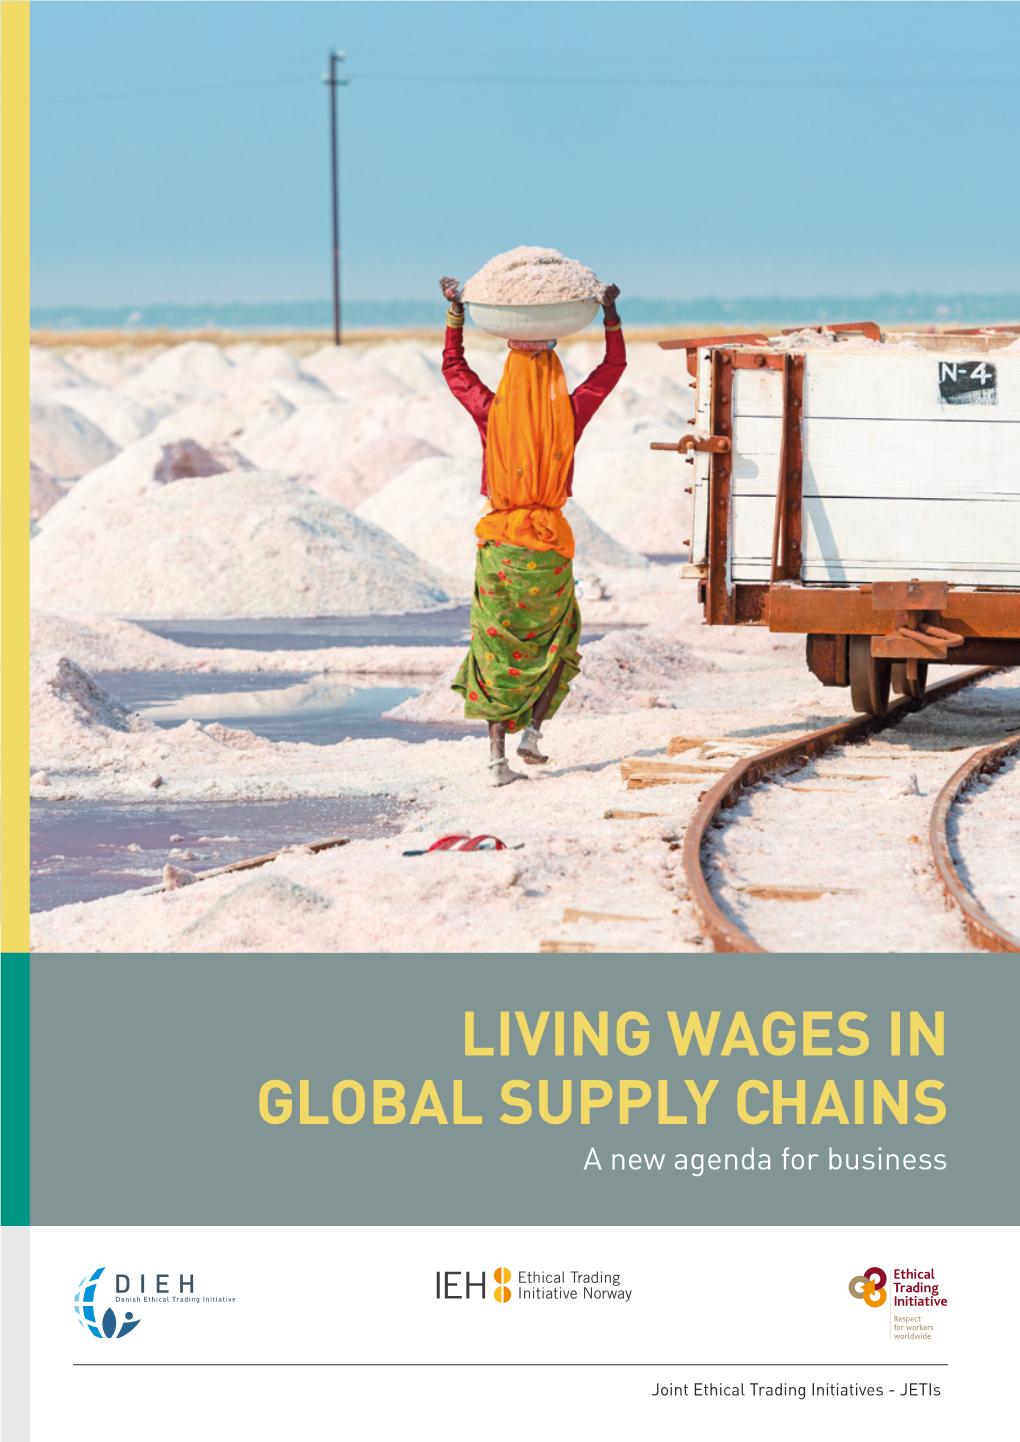 LIVING WAGES in GLOBAL SUPPLY CHAINS a New Agenda for Business